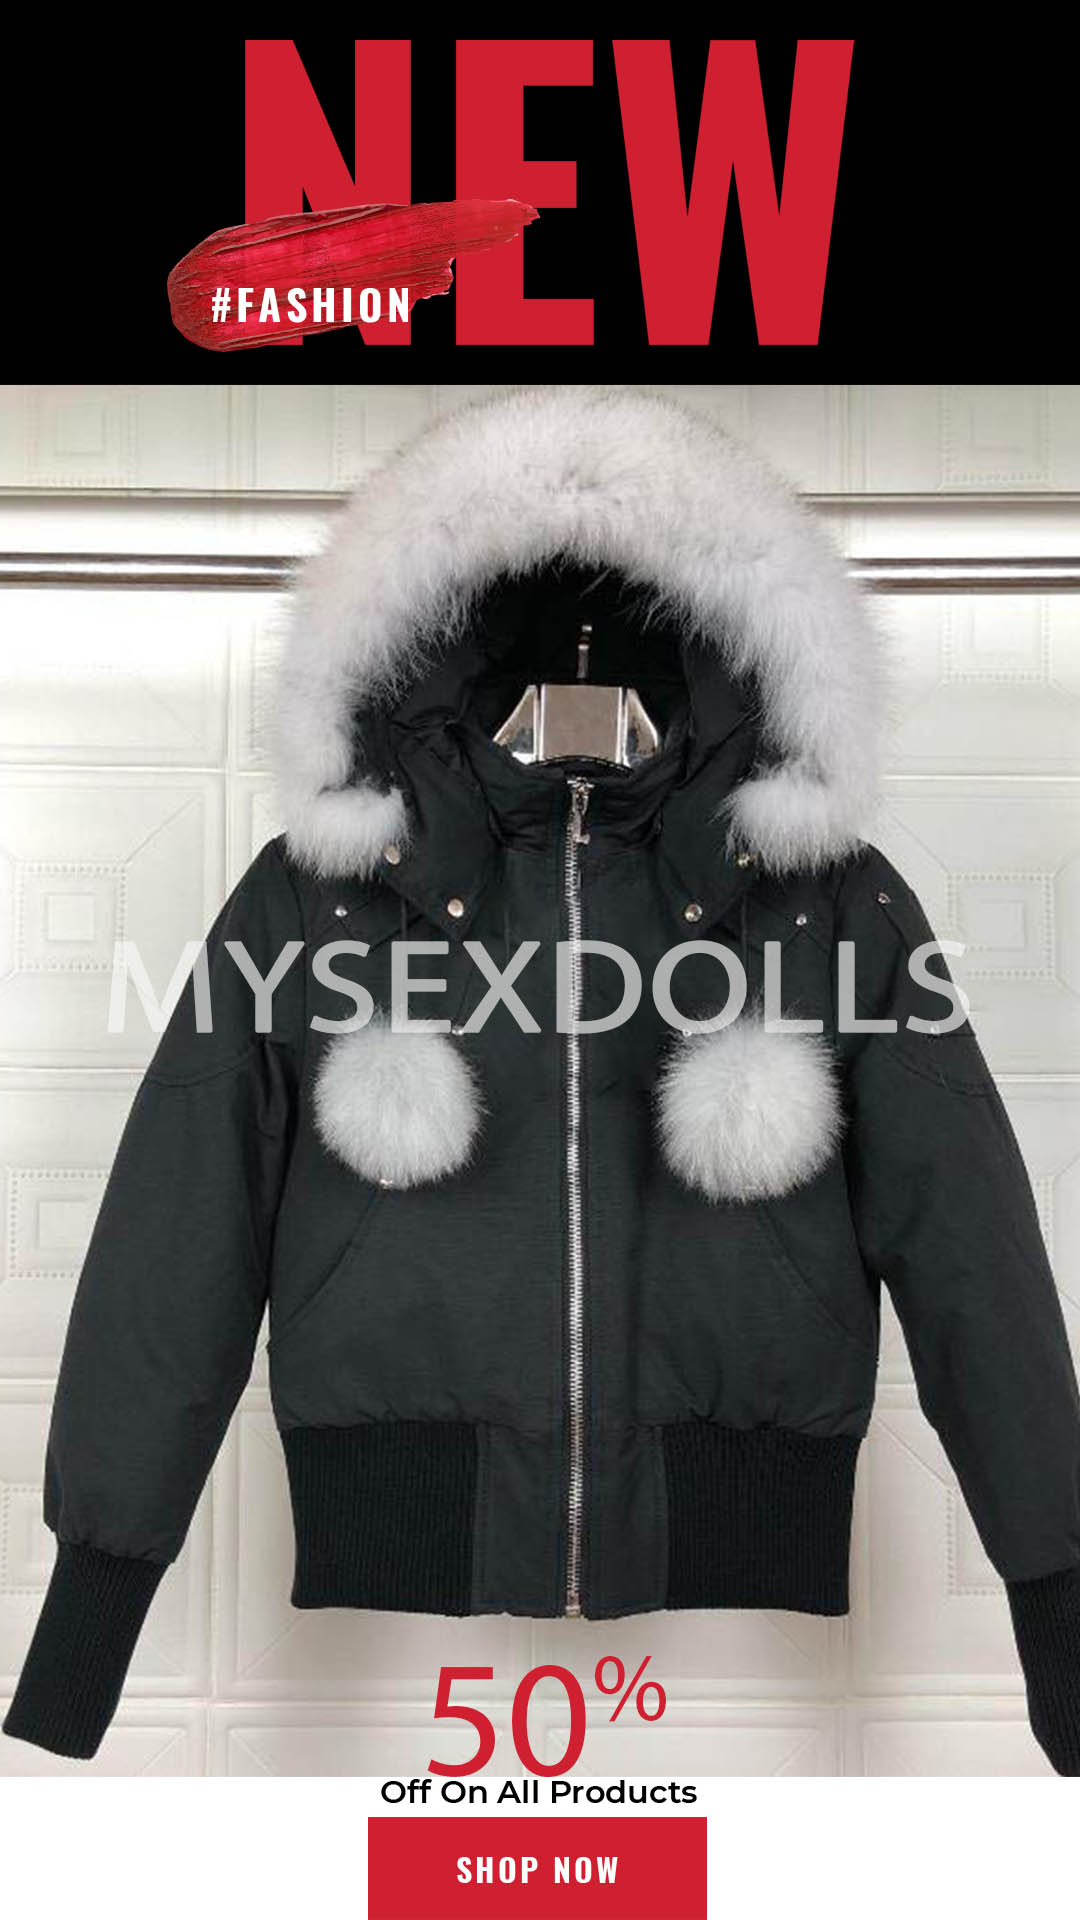 

2020 Top Canada Women Trillium Femme Outdoors Fur Down Jacket Hiver Thick Warm Goose Down Coat Thicken Fourrure Hooded Jacket, Photo color